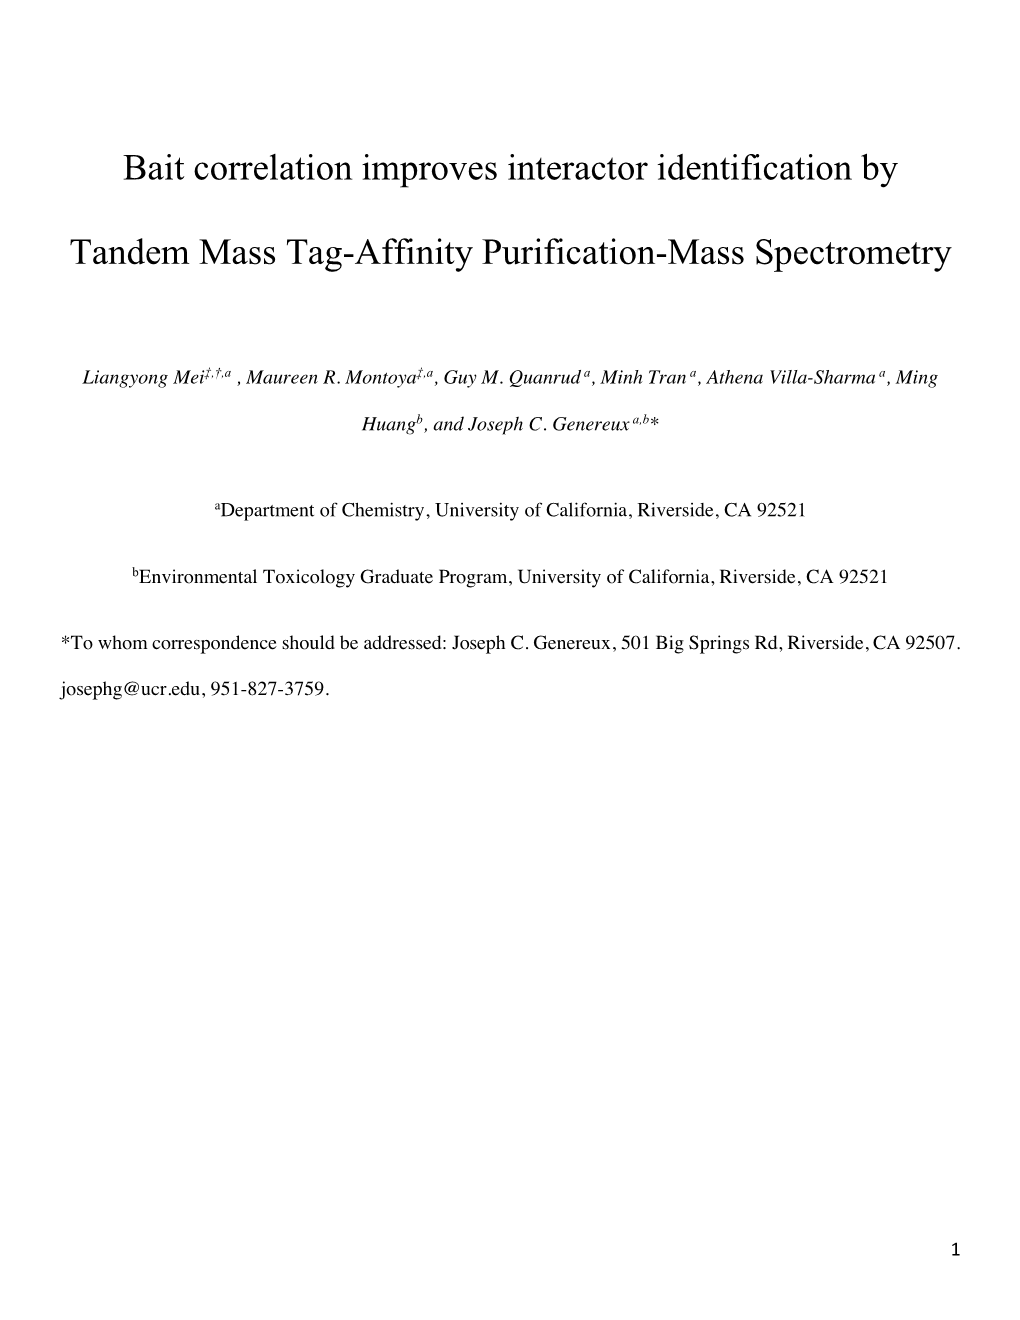 Bait Correlation Improves Interactor Identification by Tandem Mass Tag